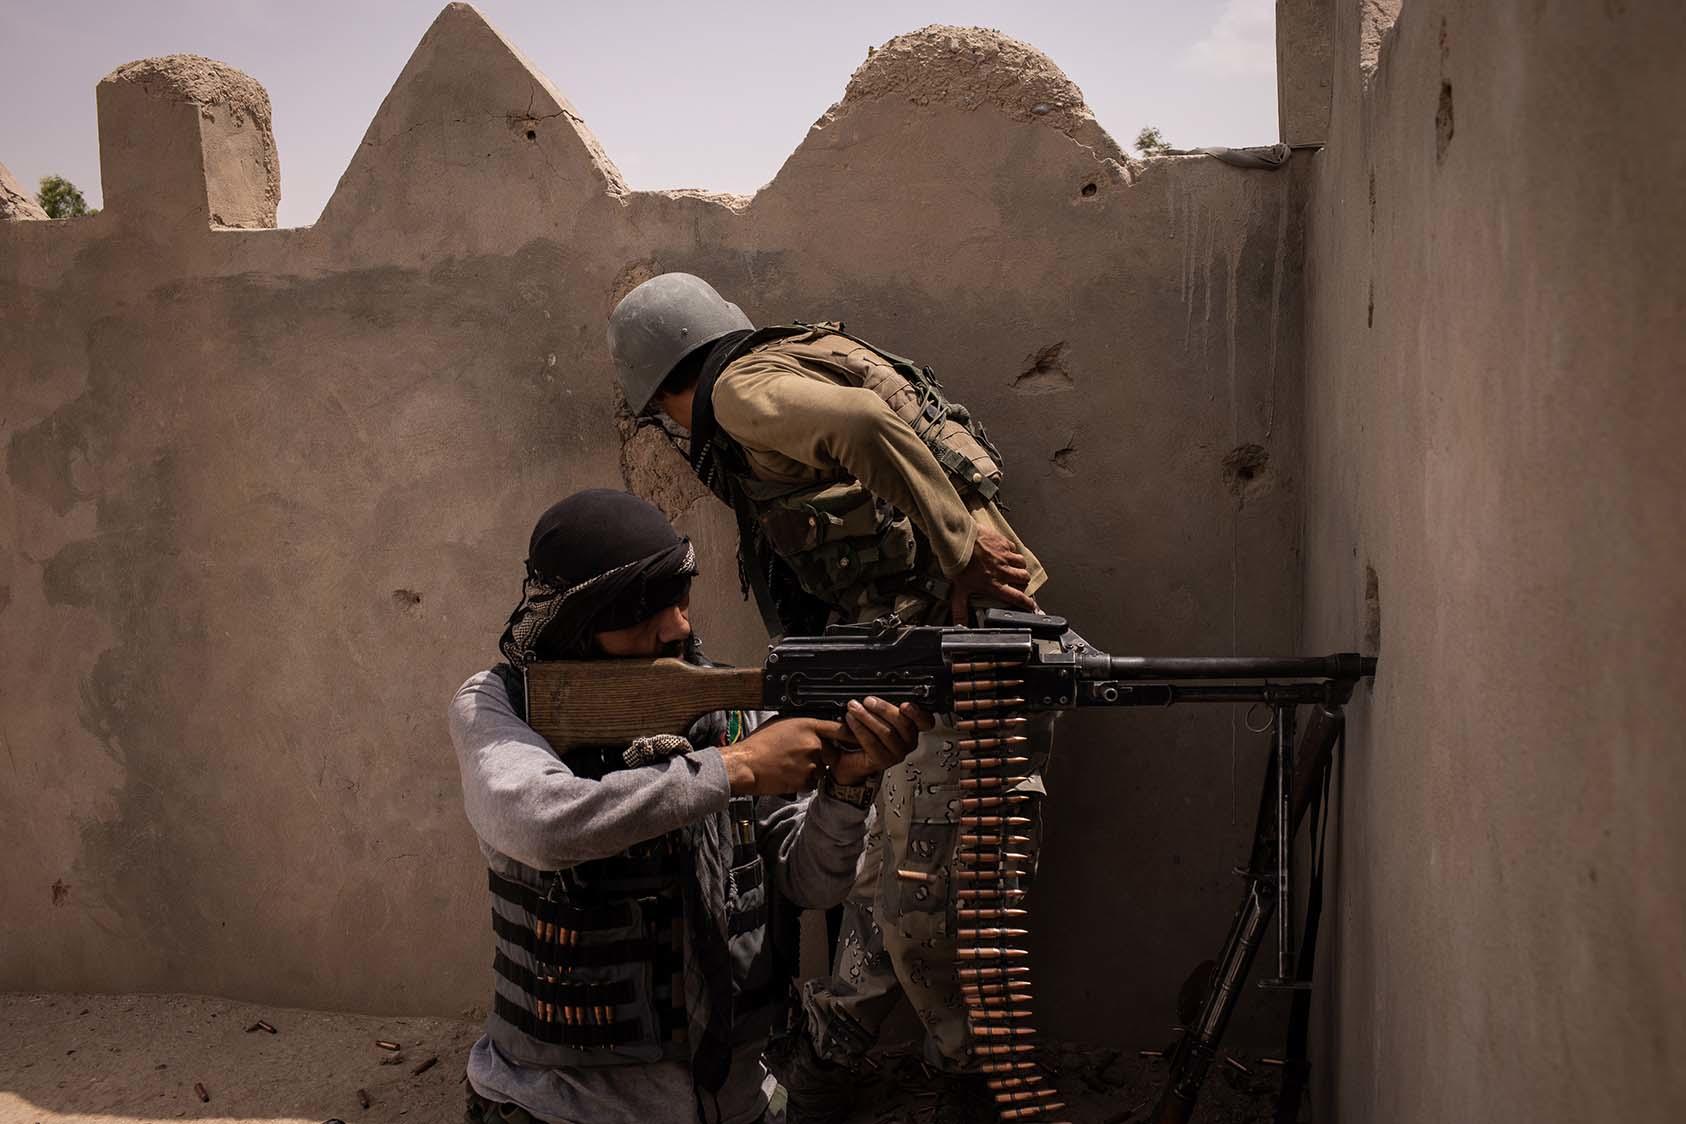 An Afghan soldier fires a machine gun at Taliban positions in Lashkar Gah, Afghanistan on May 10, 2021. (Jim Huylebroek/The New York Times)